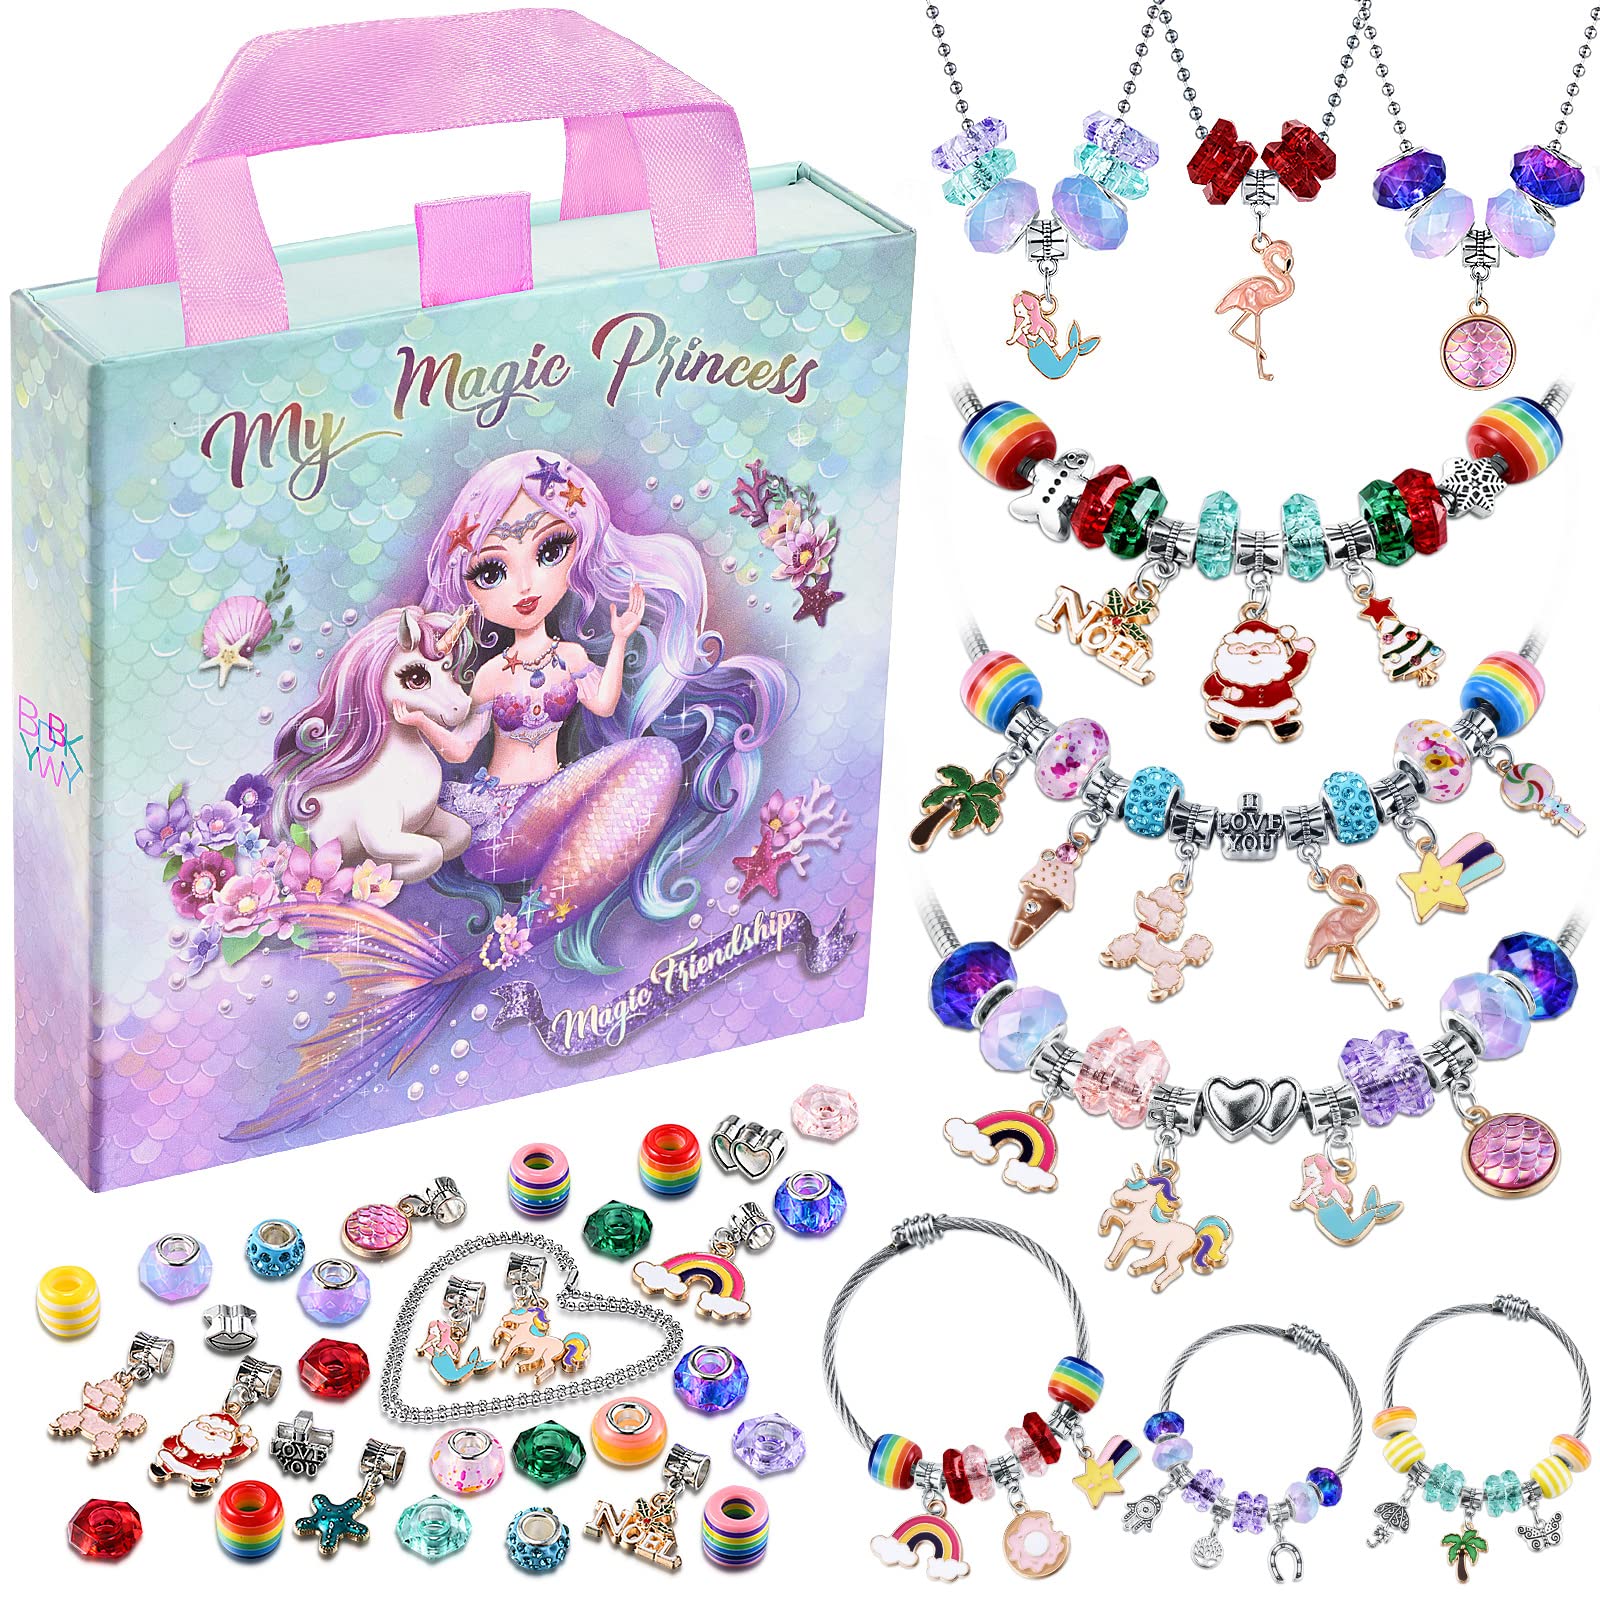 $4/mo - Finance BDBKYWY Charm Bracelet Making Kit & Unicorn/Mermaid Girl  Toy- ideal Crafts for Ages 8-12 Girls who Inspire Imagination and Create  Magic with Art Set and Jewelry Making Kit